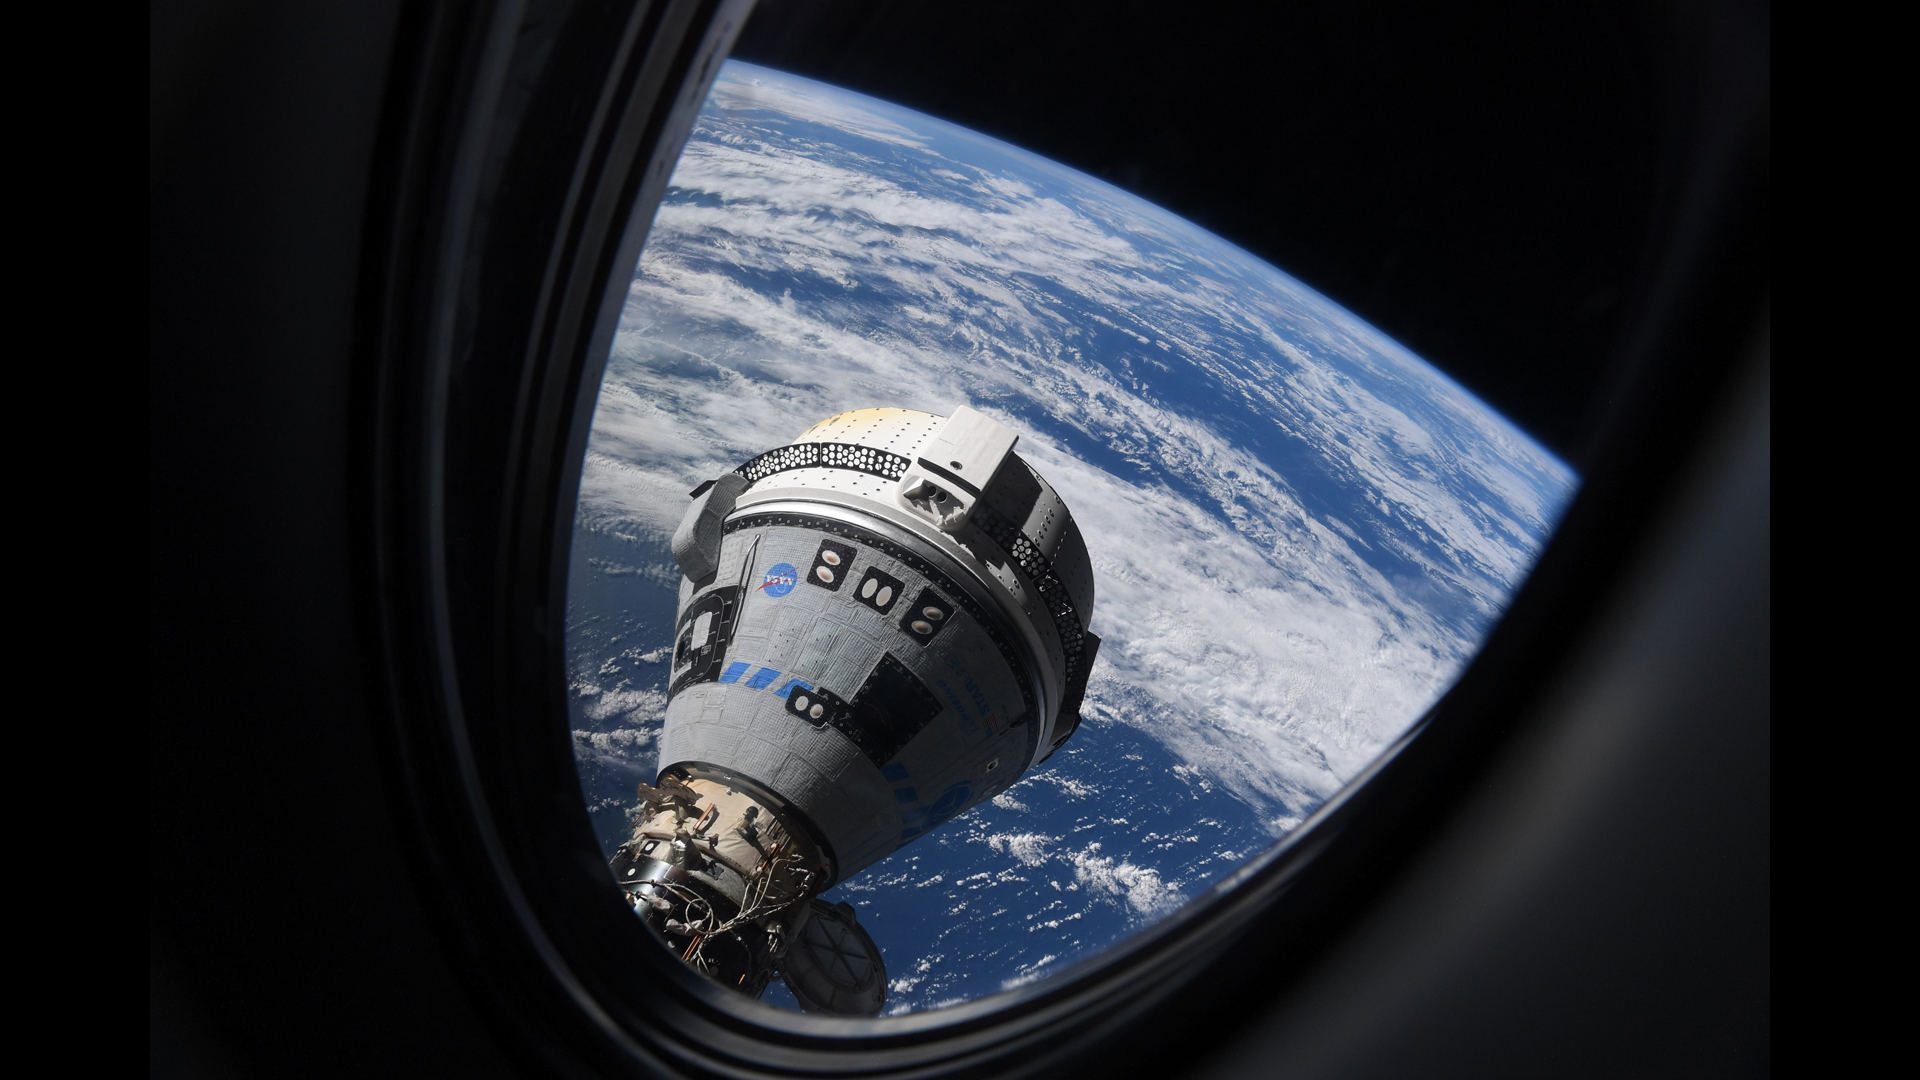 view out of space station window of a spacecraft docked, with the earth in the background